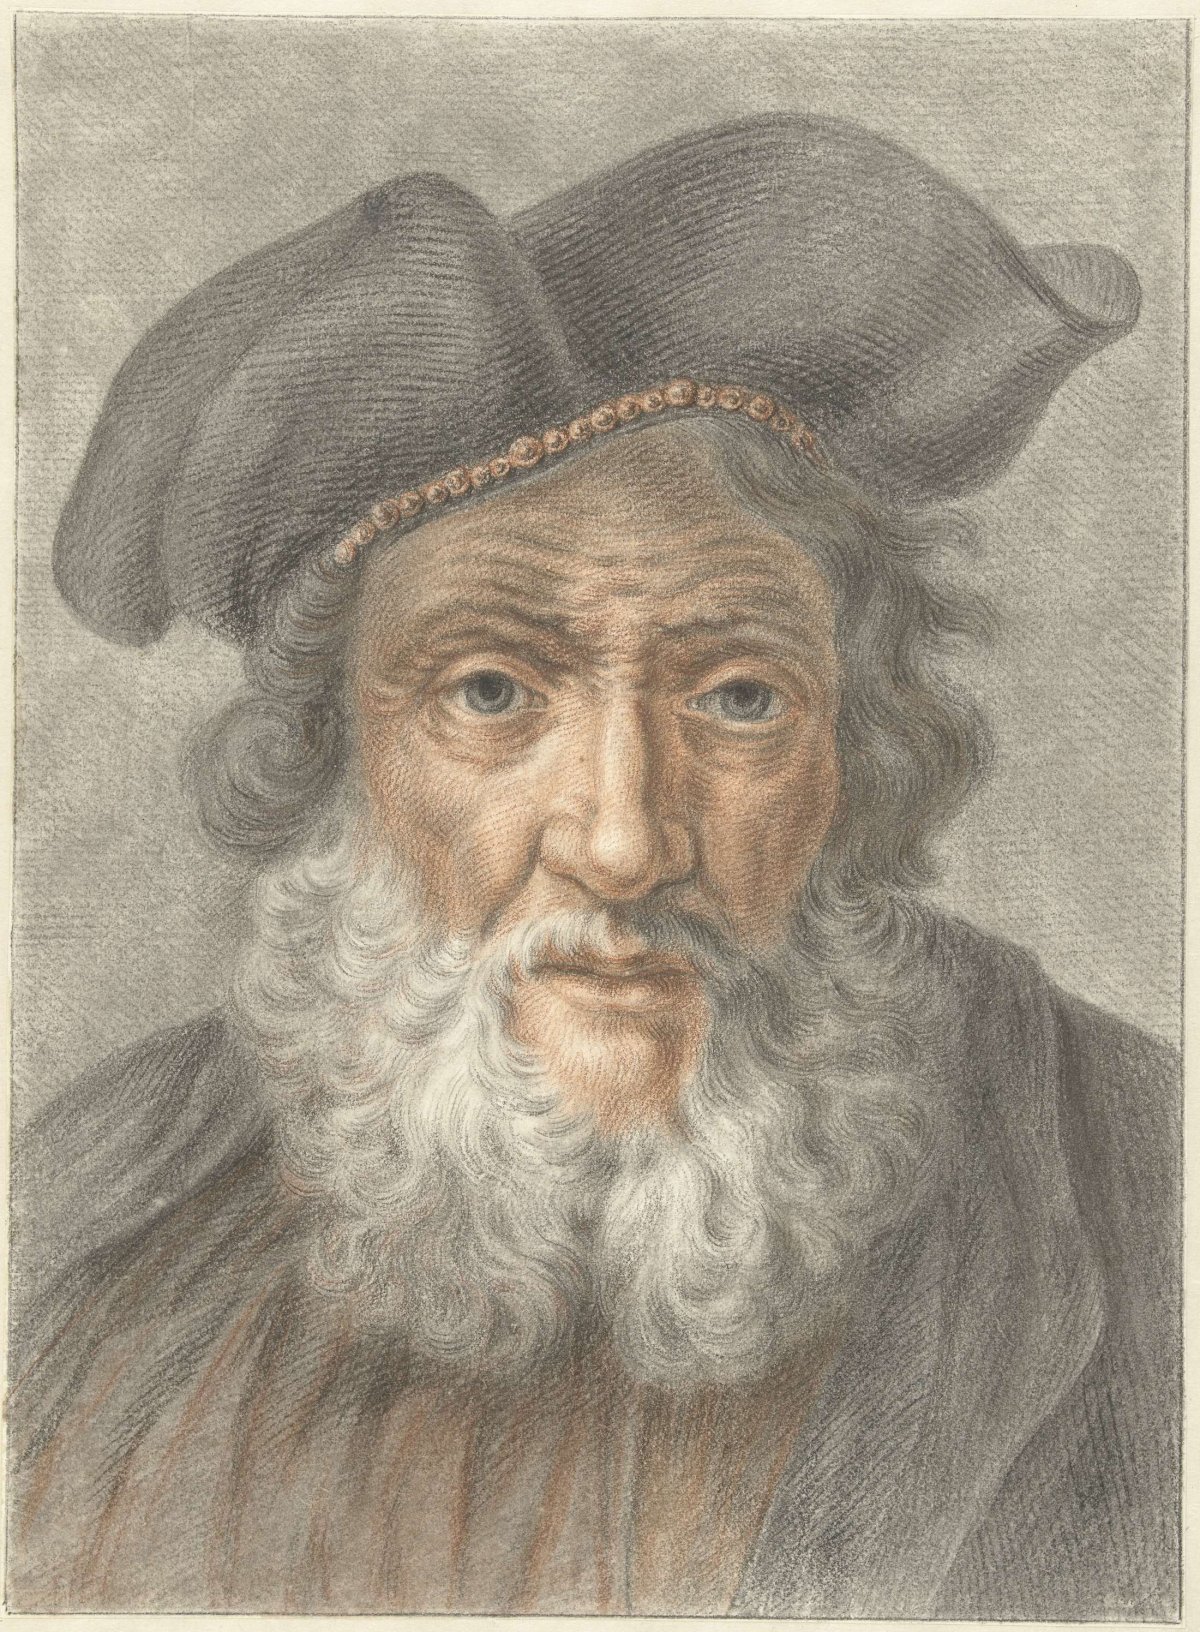 Old man with hat, Abraham Delfos, 1741 - 1820